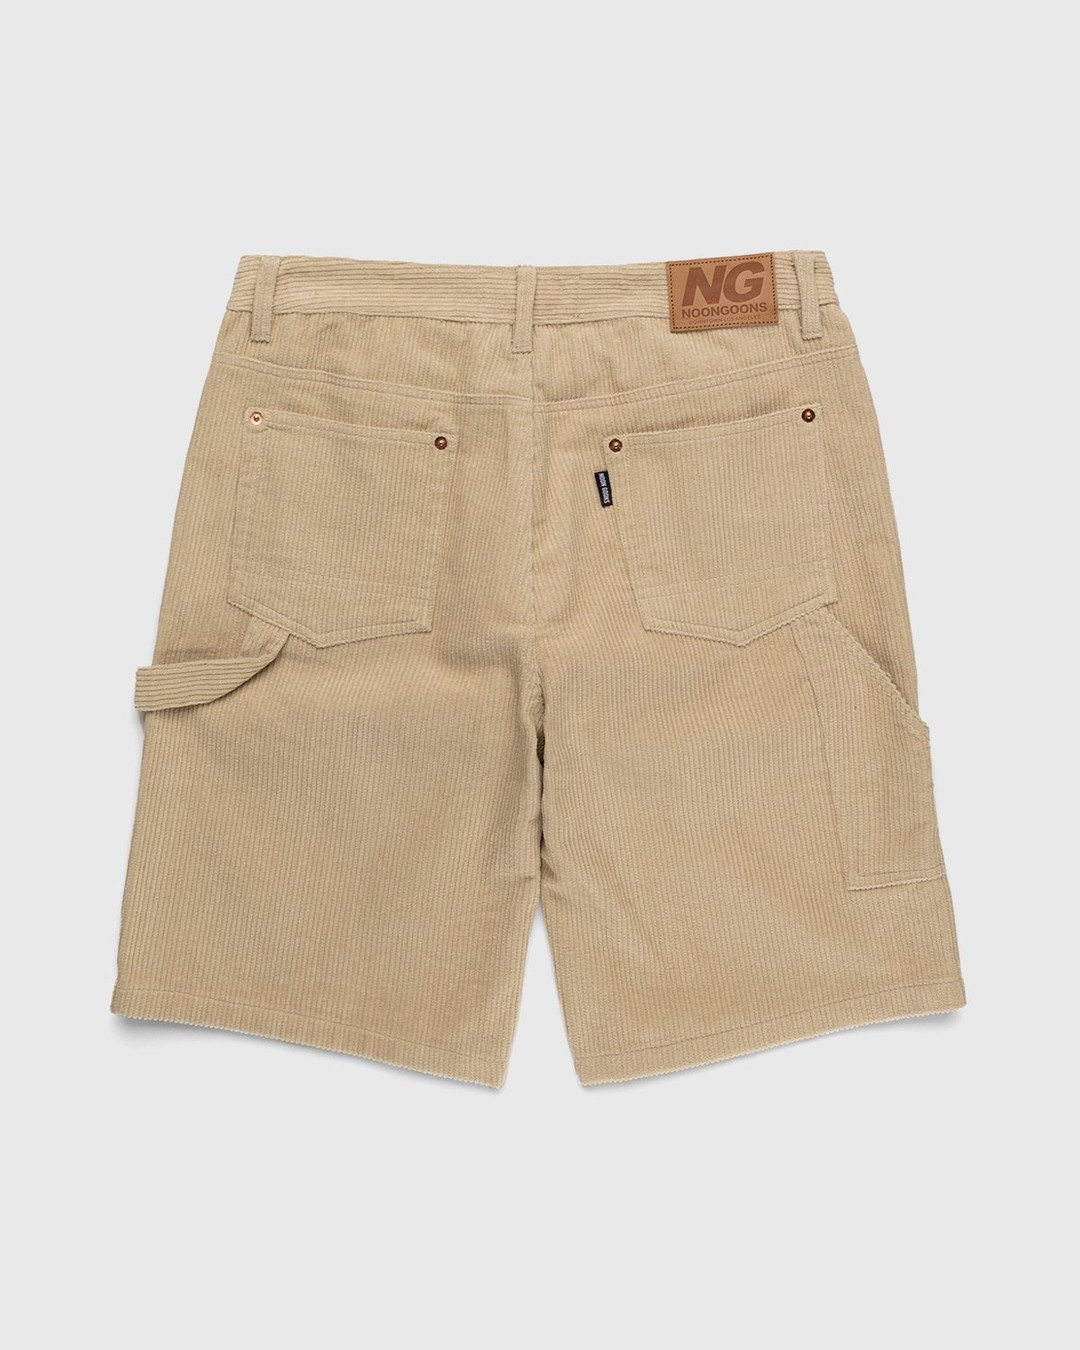 Noon Goons – Sublime Cord Short Overcast - Bermuda Cuts - Beige - Image 2